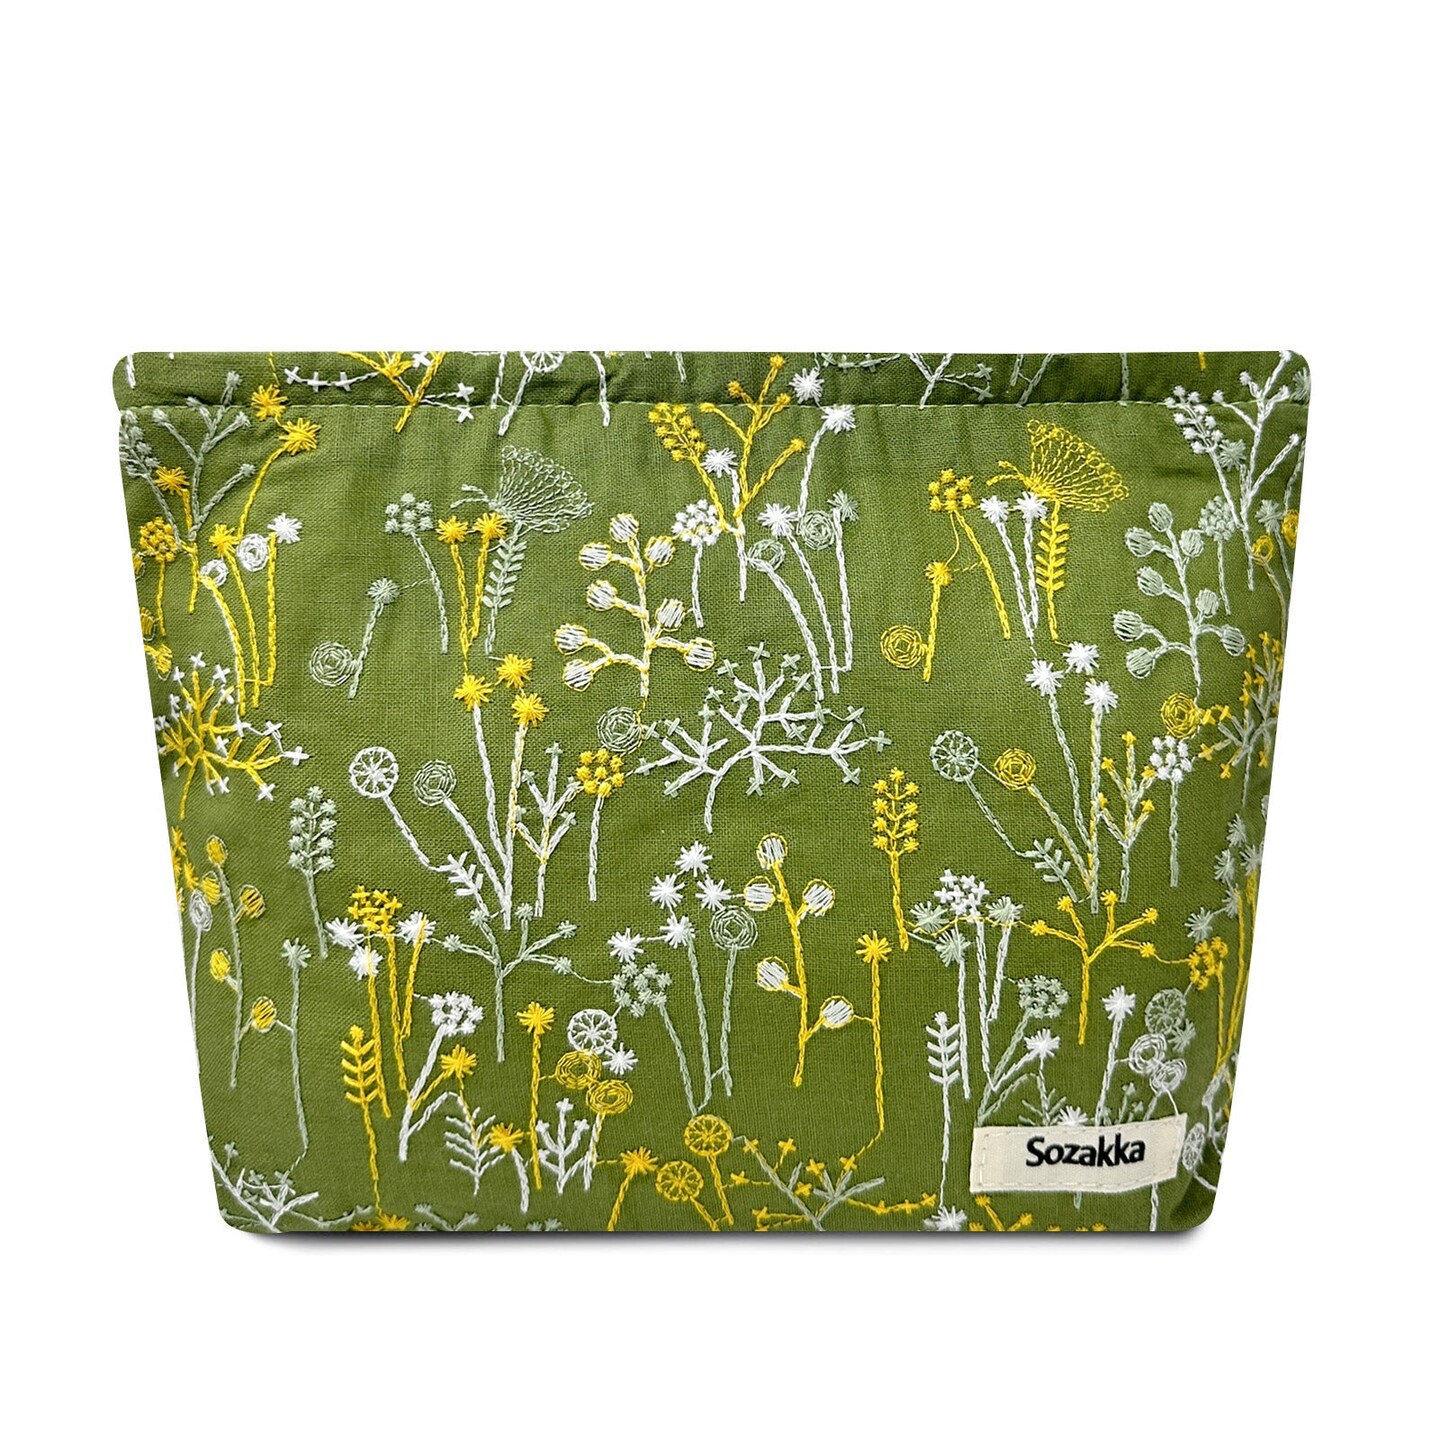 Wrapables Cosmetic Pouch, Makeup and Toiletry Travel Bag, Embroidered Grass